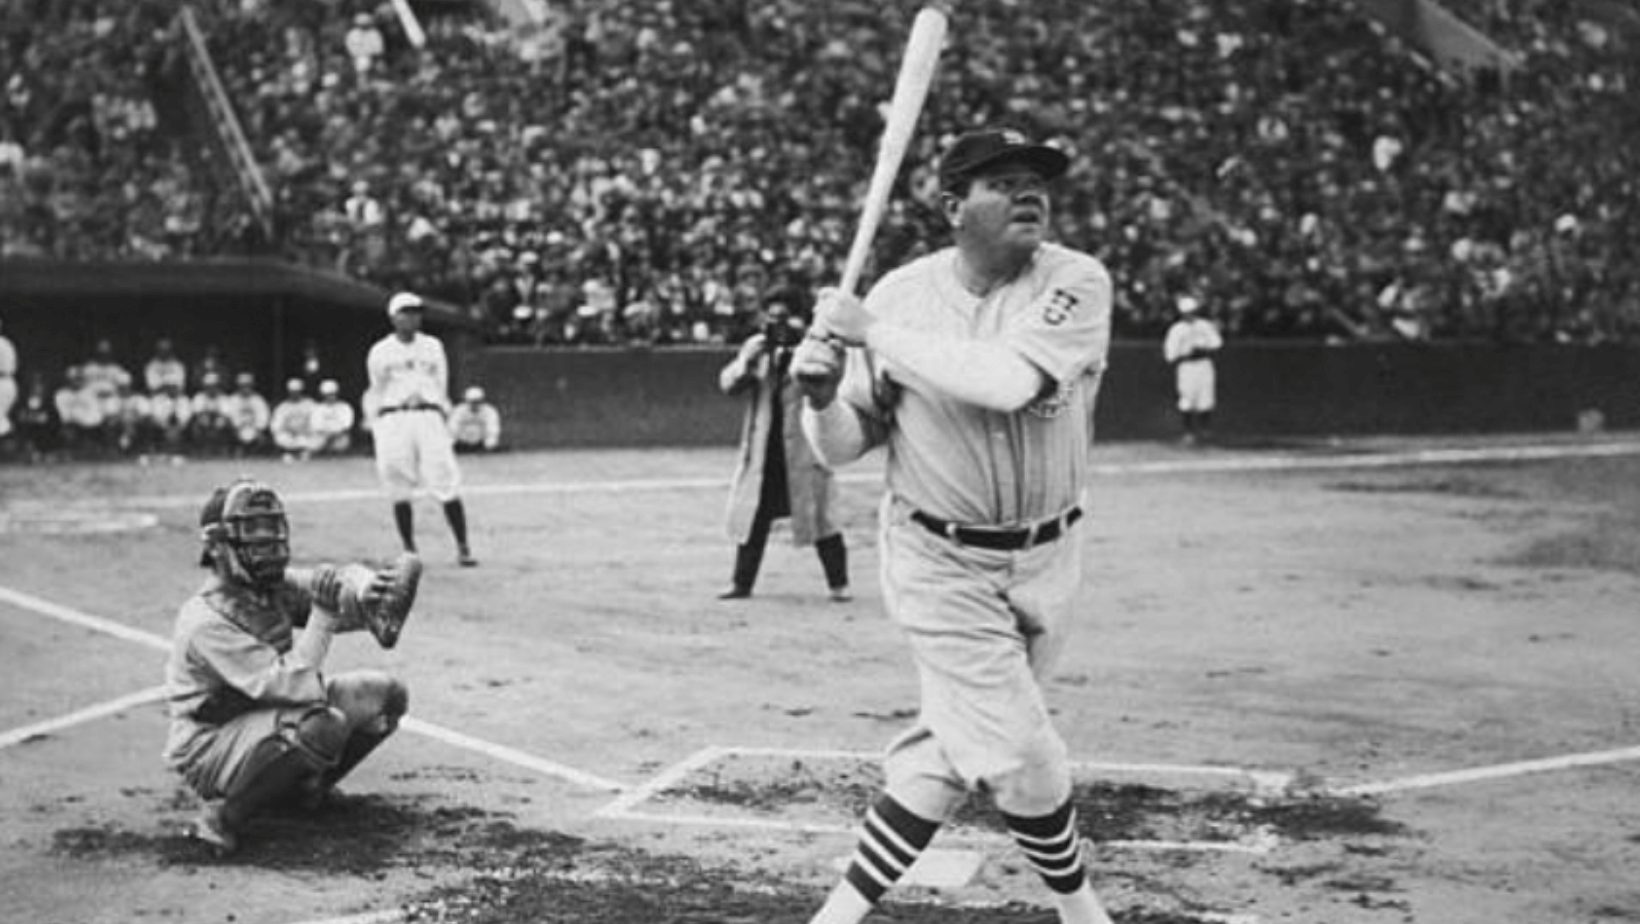 B.R.B: What does BRB mean in Sports? Babe Ruth